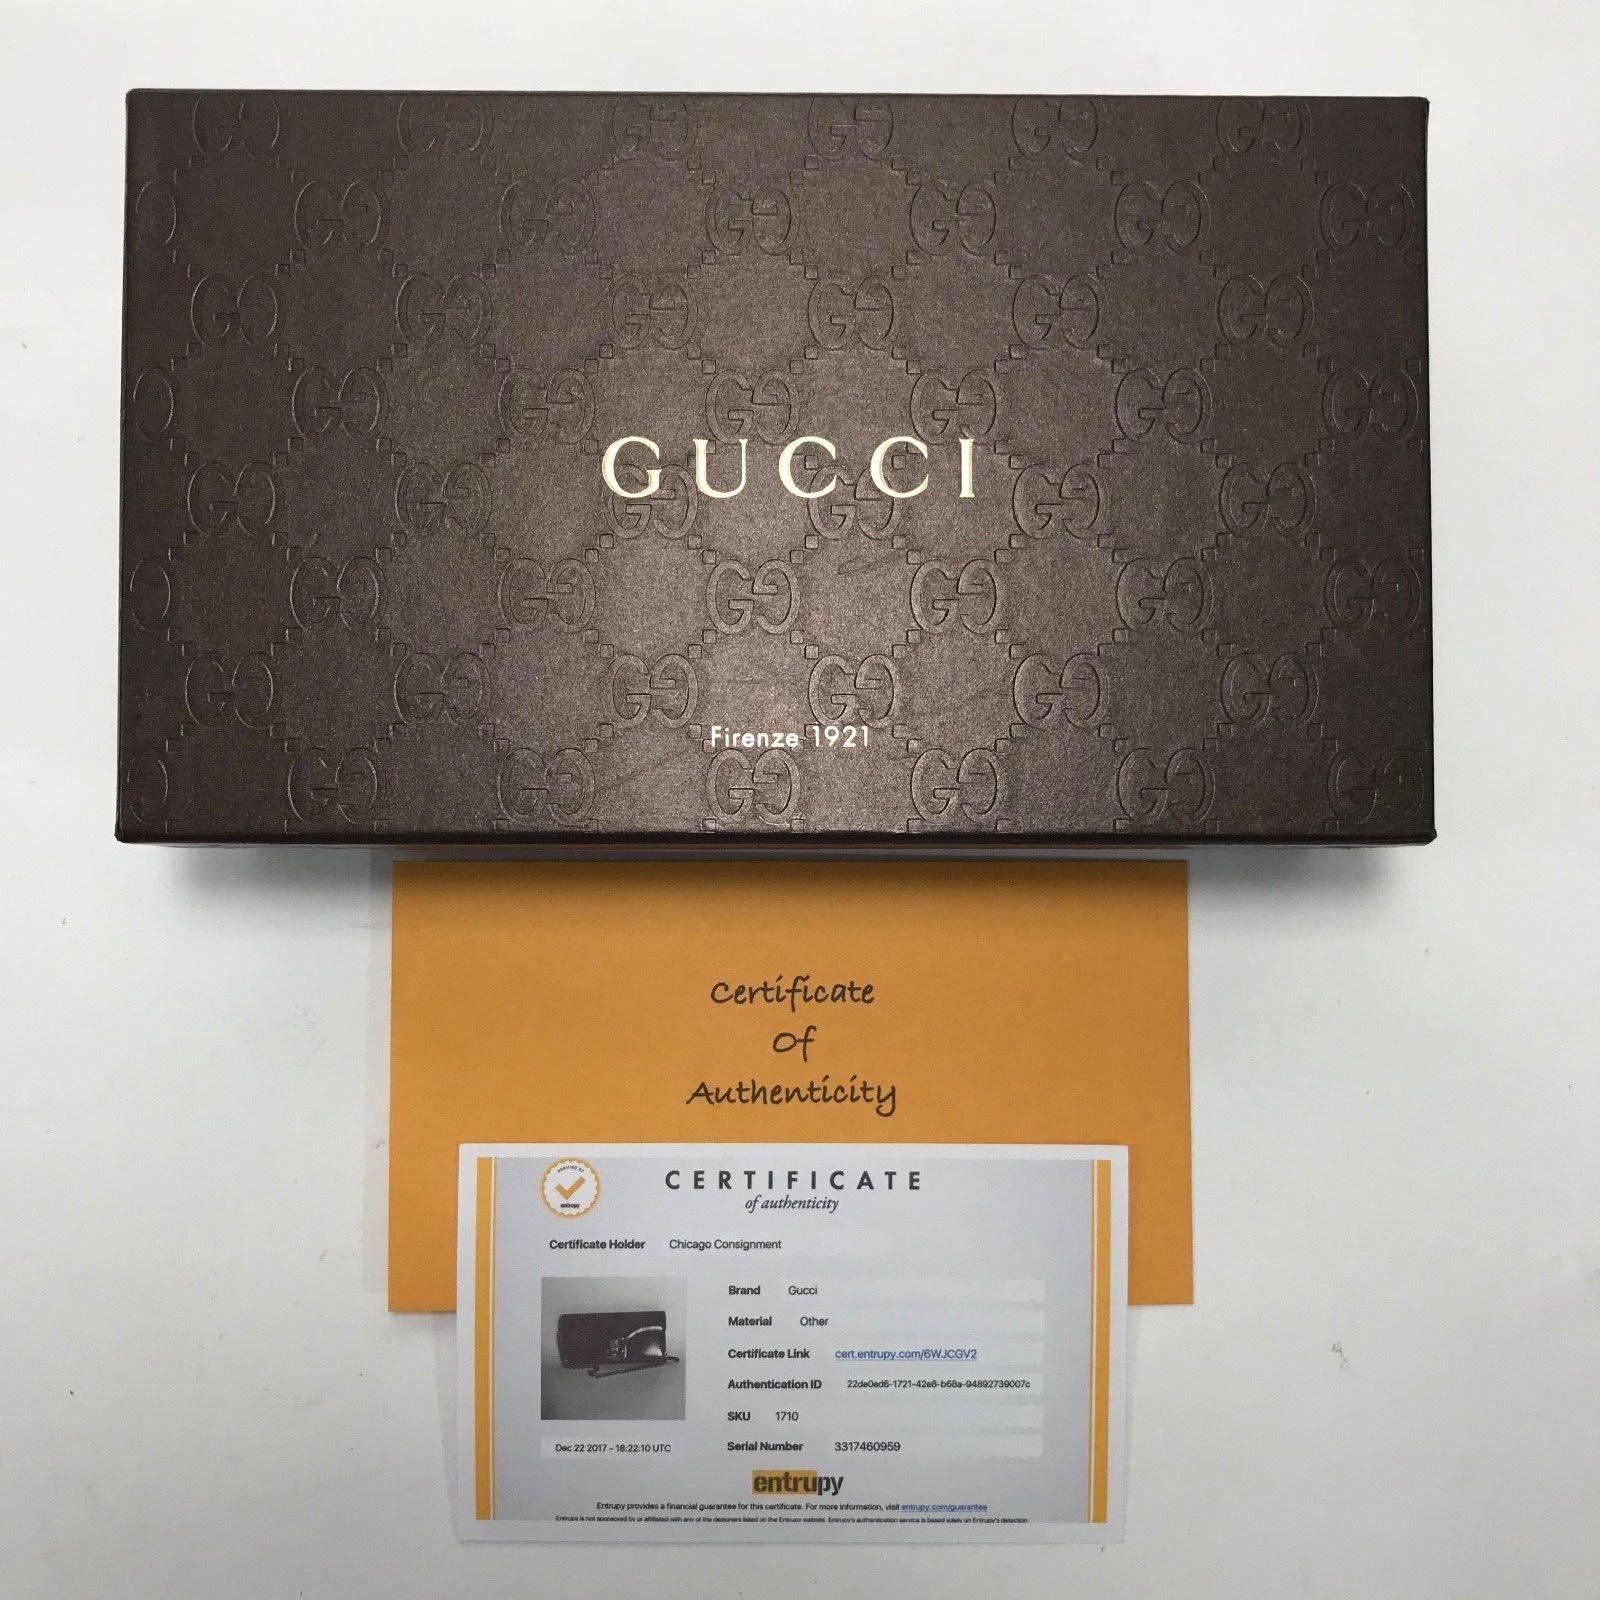 MODEL - Gucci Padlock Continental Wallet on Chain

CONDITION - Exceptional. Bright shiny hardware with no scratches. No rips, holes, tears, stains or odors. Very minor scuffing. Zipper slides easily. Piece maintains original shape without cracks or